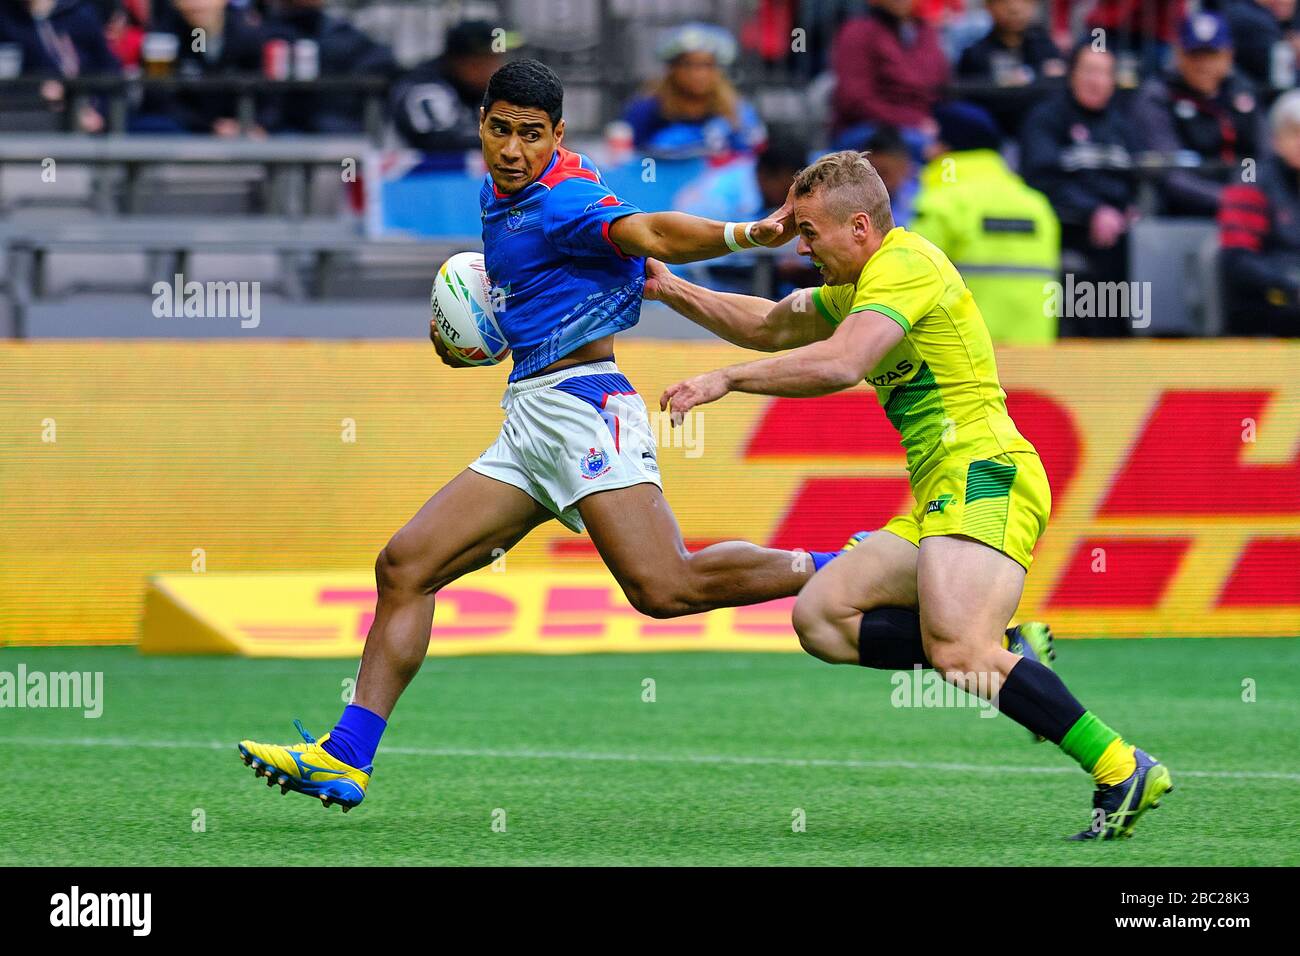 Vancouver, Canada. 7th March, 2020. Paul Scanlan #5 of Samoa tackled by Trae Williams #9 of Australia in Match #10 during Day 1 - 2020 HSBC World Rugb Stock Photo